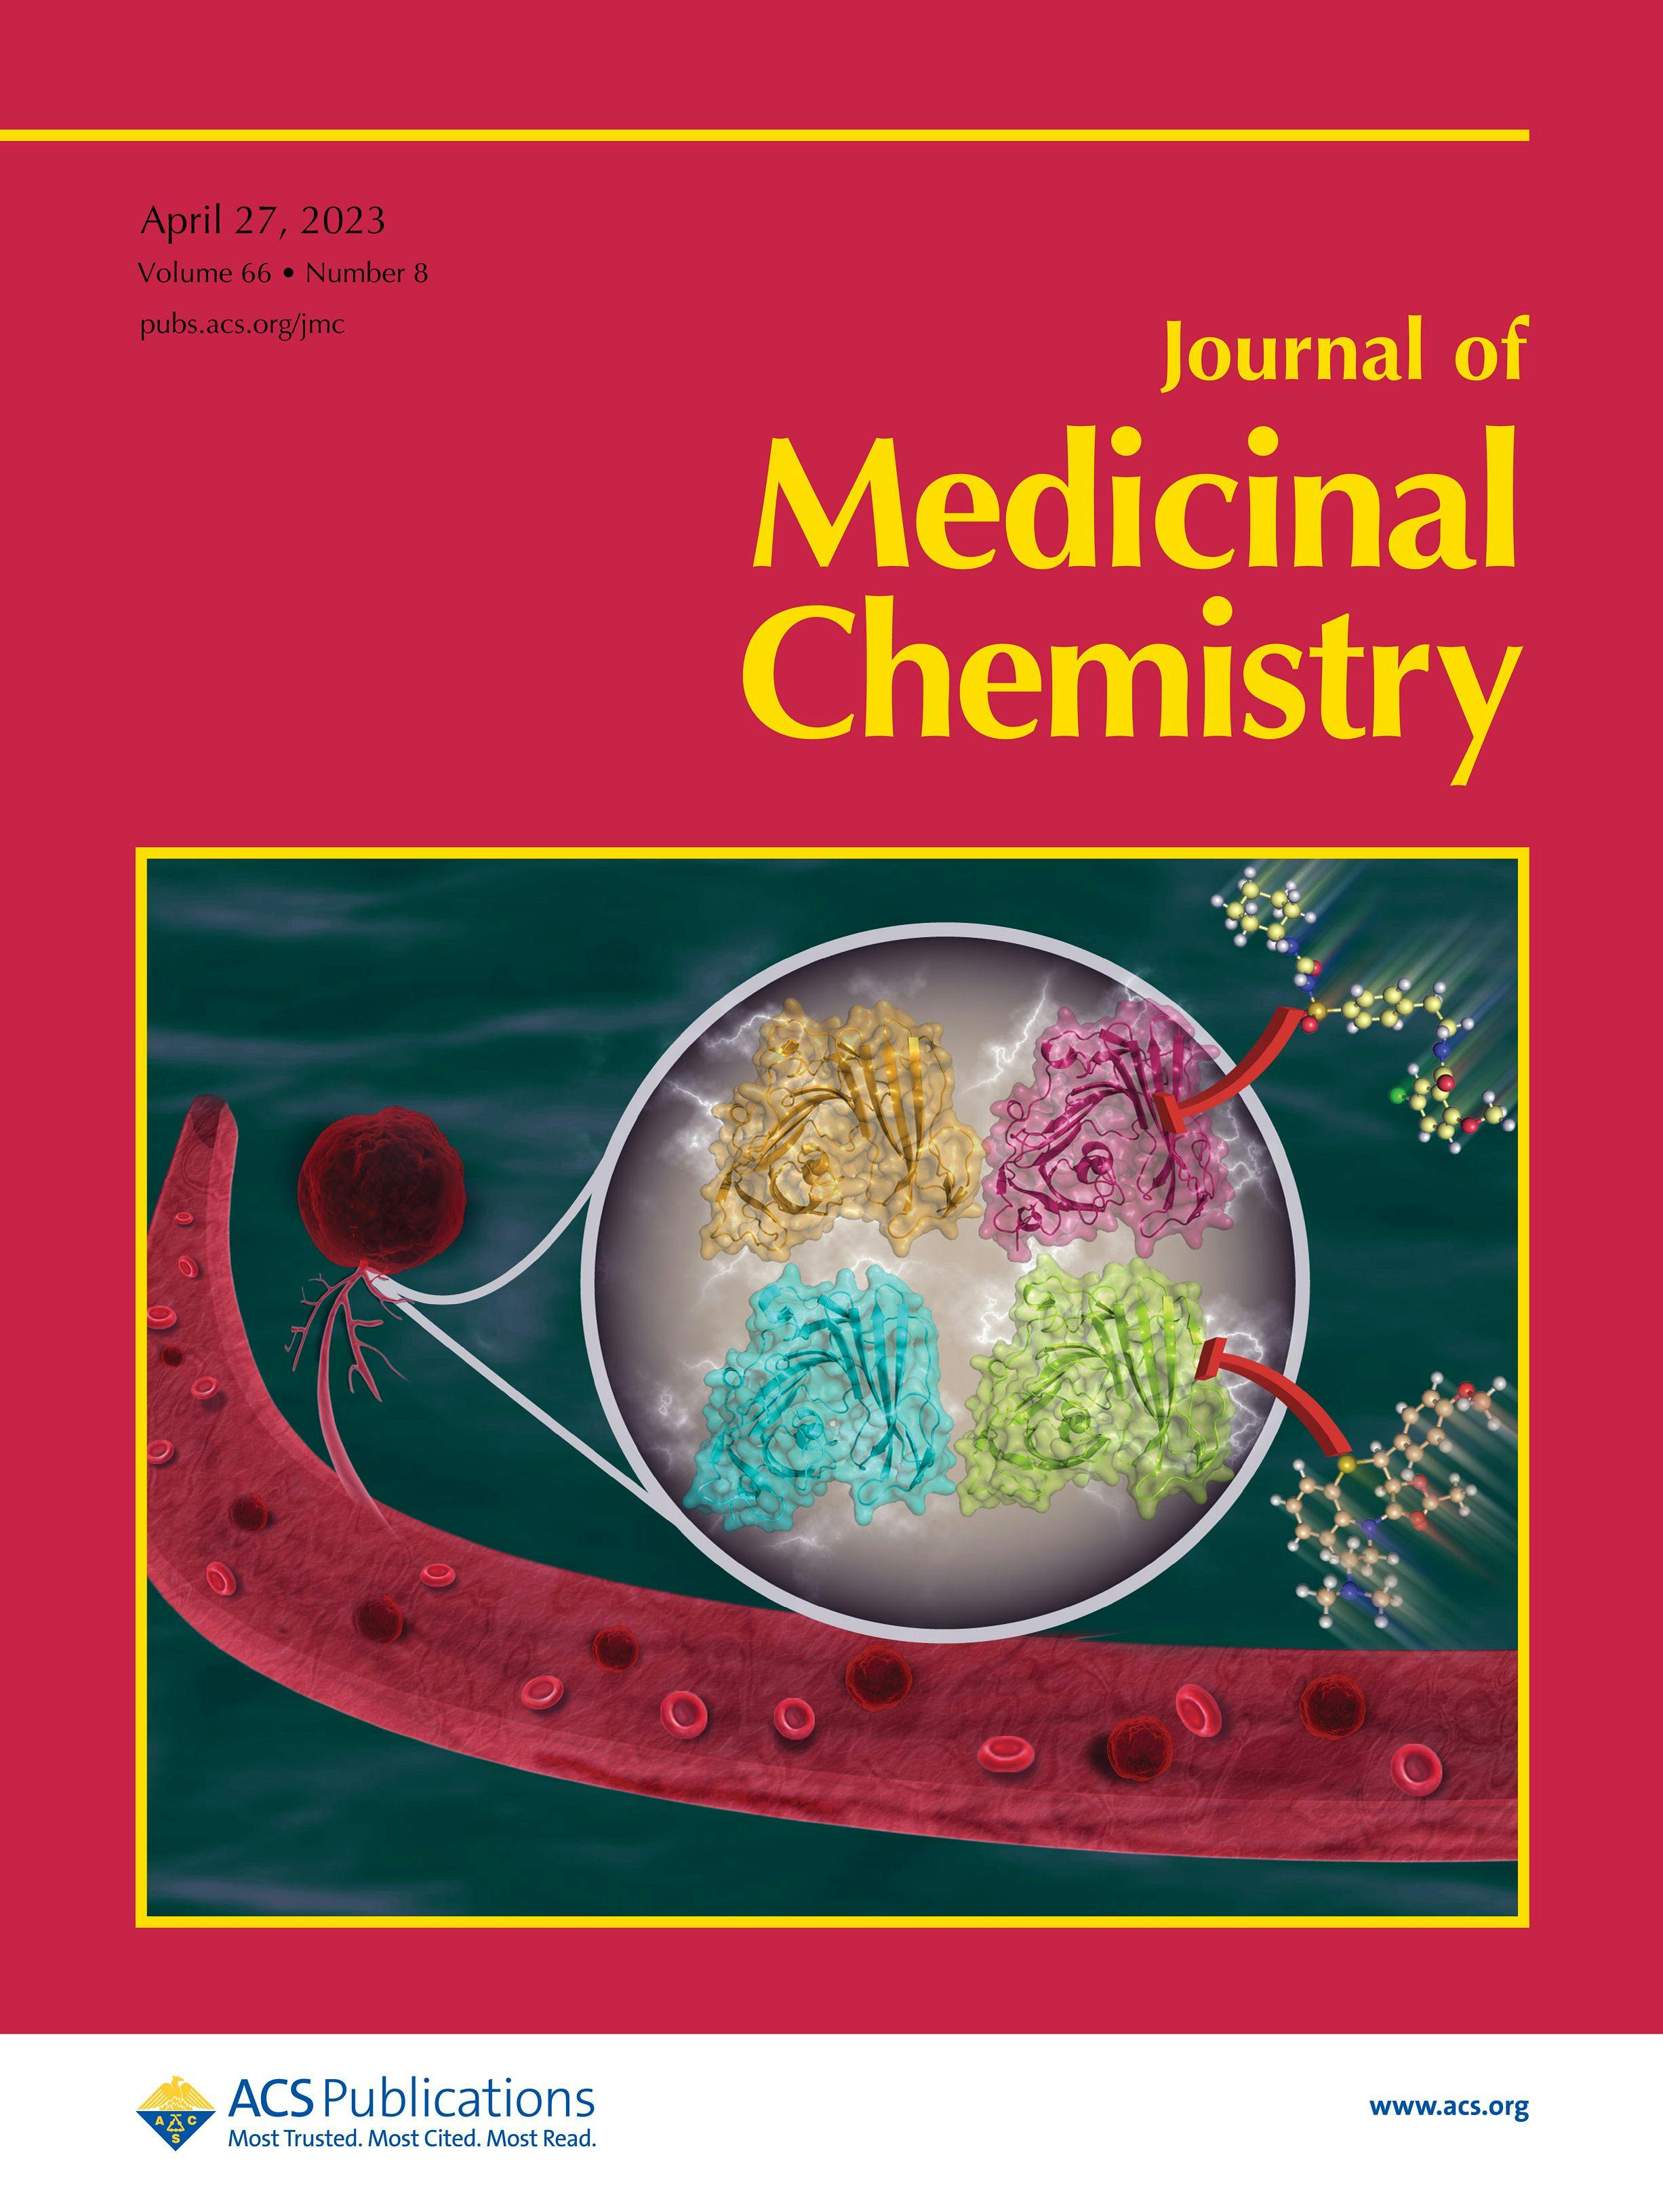 Journal of Medicinal Chemistry Cover, Volume 66 Issue 8